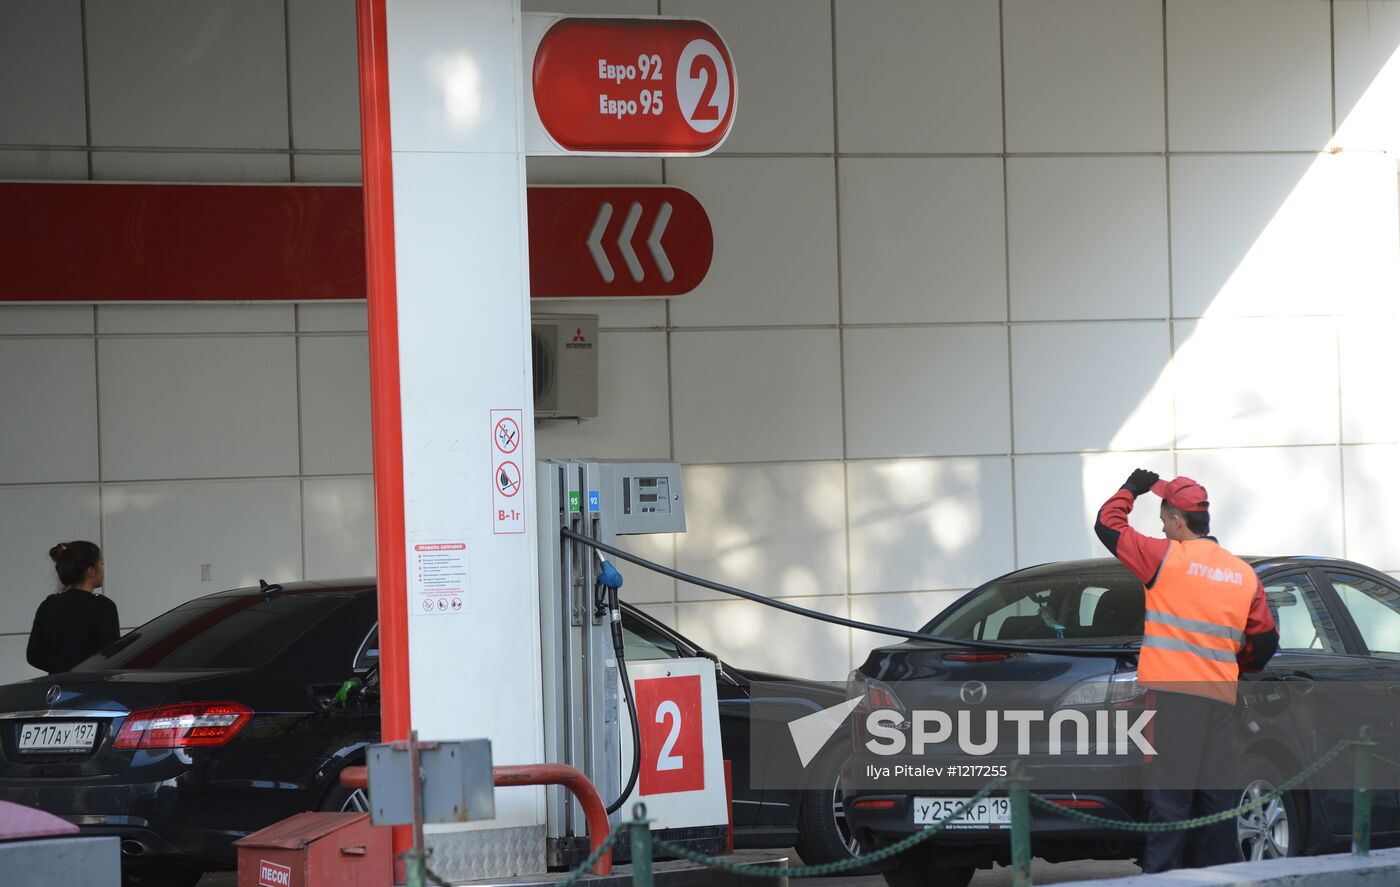 Price increase at Lukoil gas station